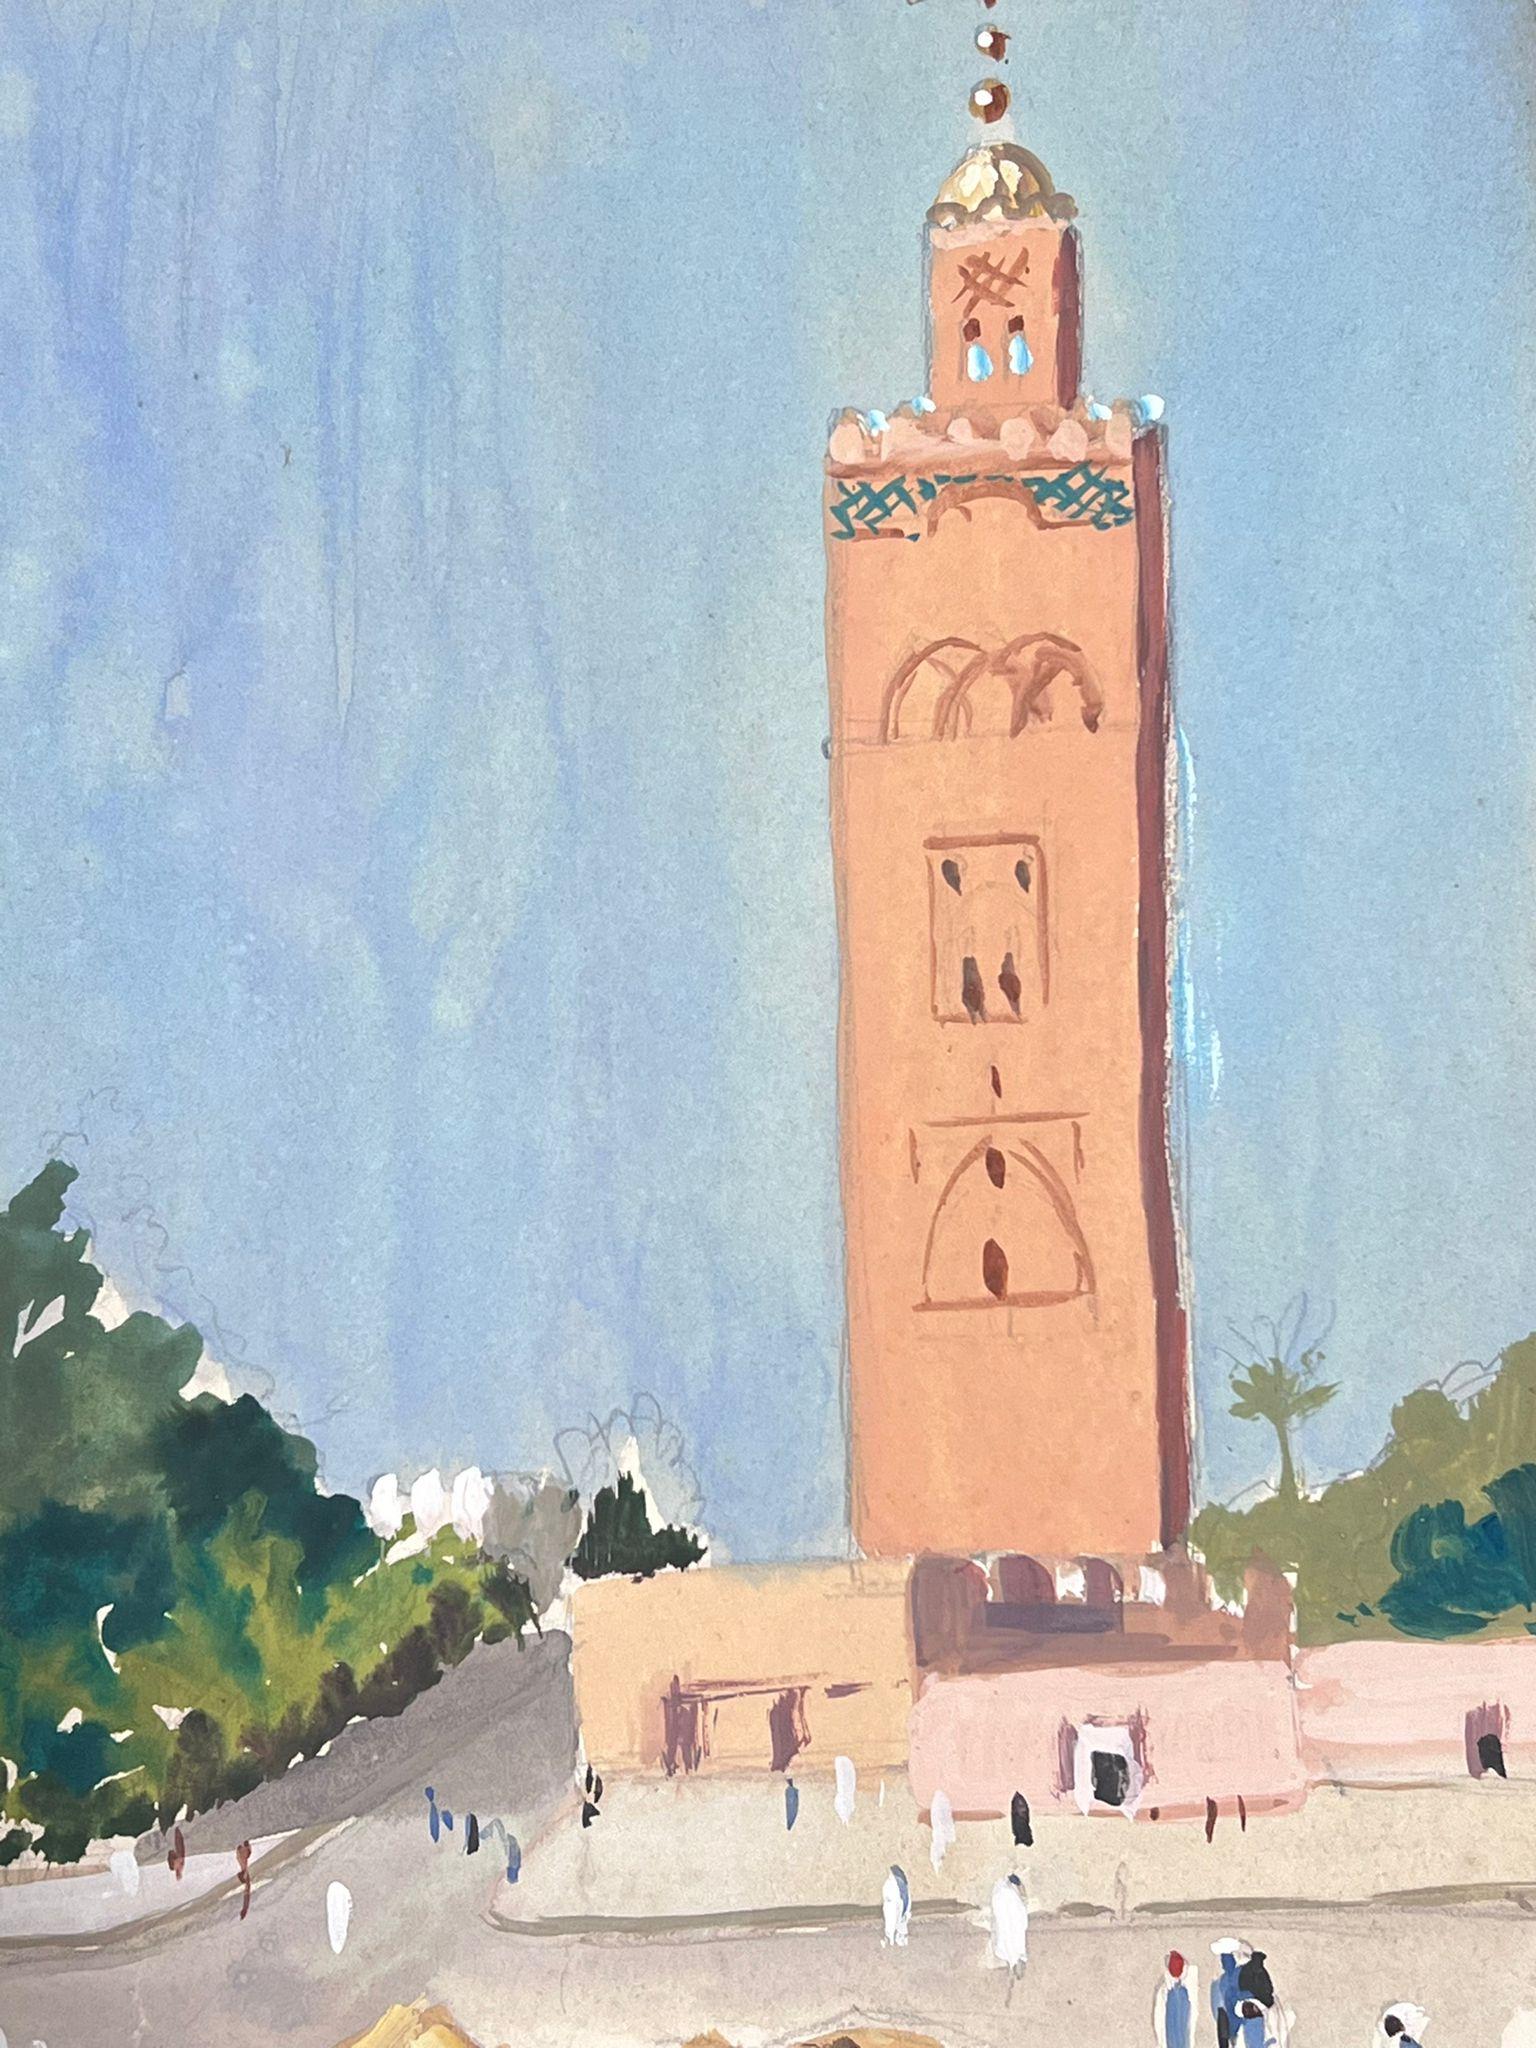 Town Bell Tower
by Louise Alix, French 1950's Impressionist 
gouache on artist paper, unframed
painting: 10.5 x 7.5 inches
provenance: from a large private collection of this artists work in Northern France
condition: original, good and sound